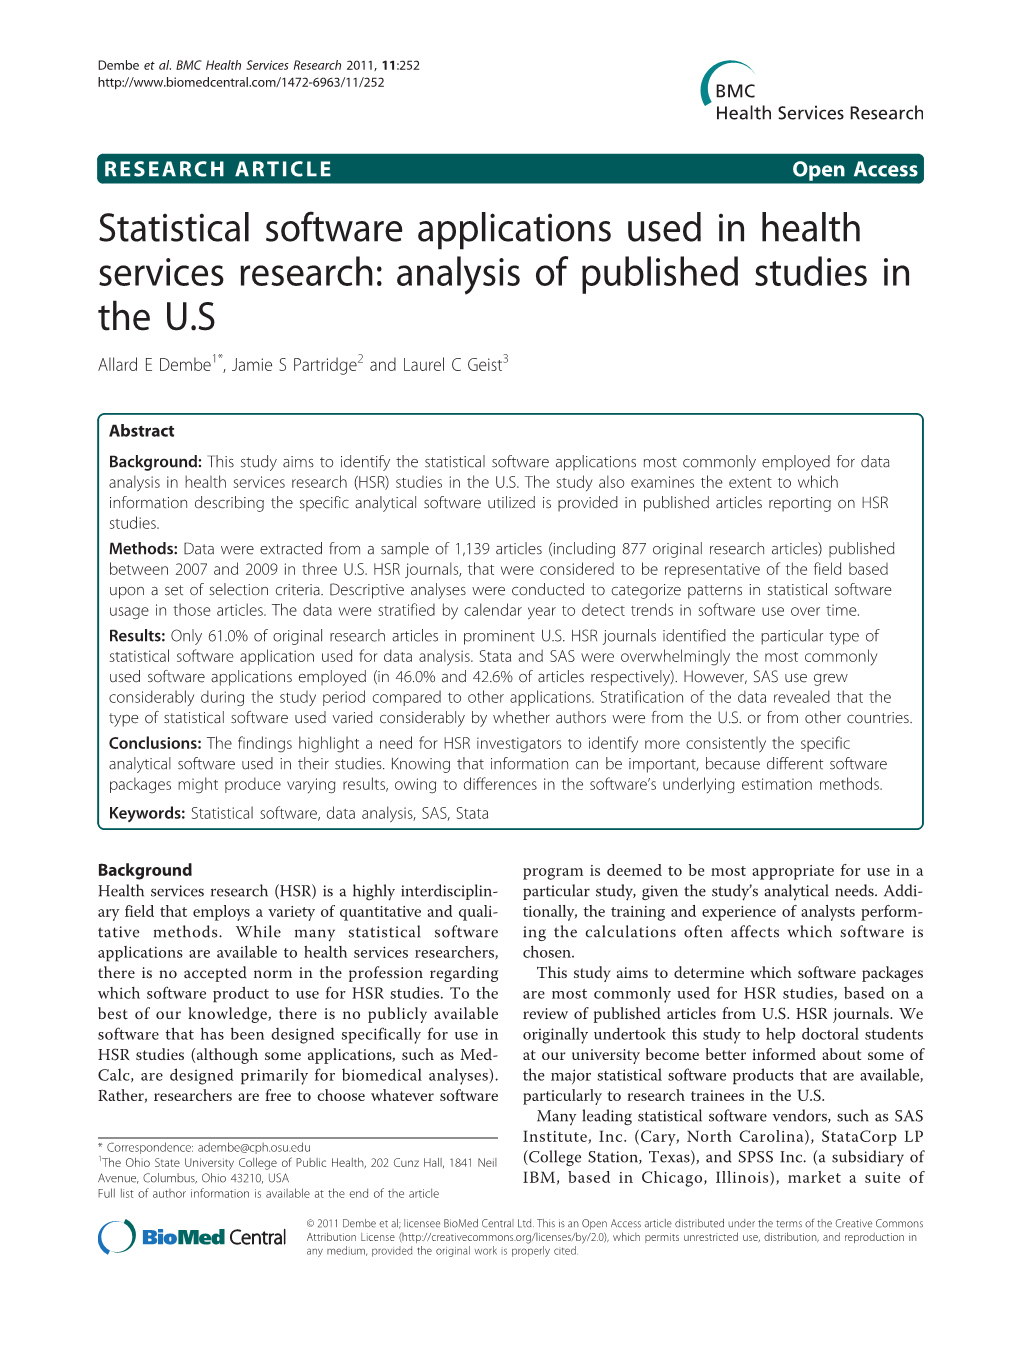 Statistical Software Applications Used in Health Services Research: Analysis of Published Studies in the U.S Allard E Dembe1*, Jamie S Partridge2 and Laurel C Geist3